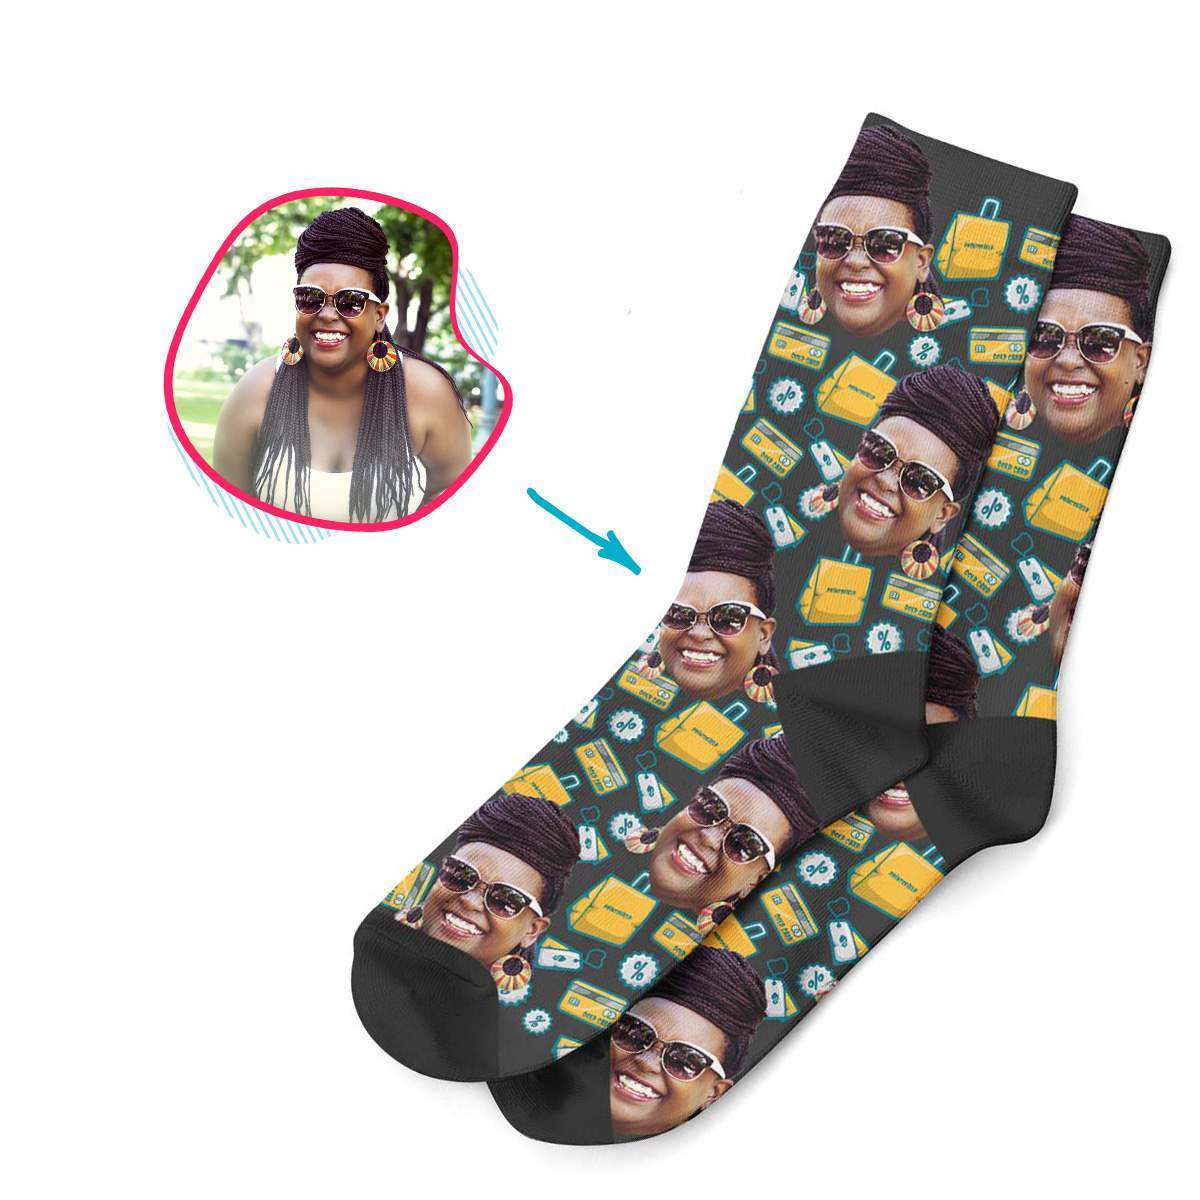 dark Shopping socks personalized with photo of face printed on them